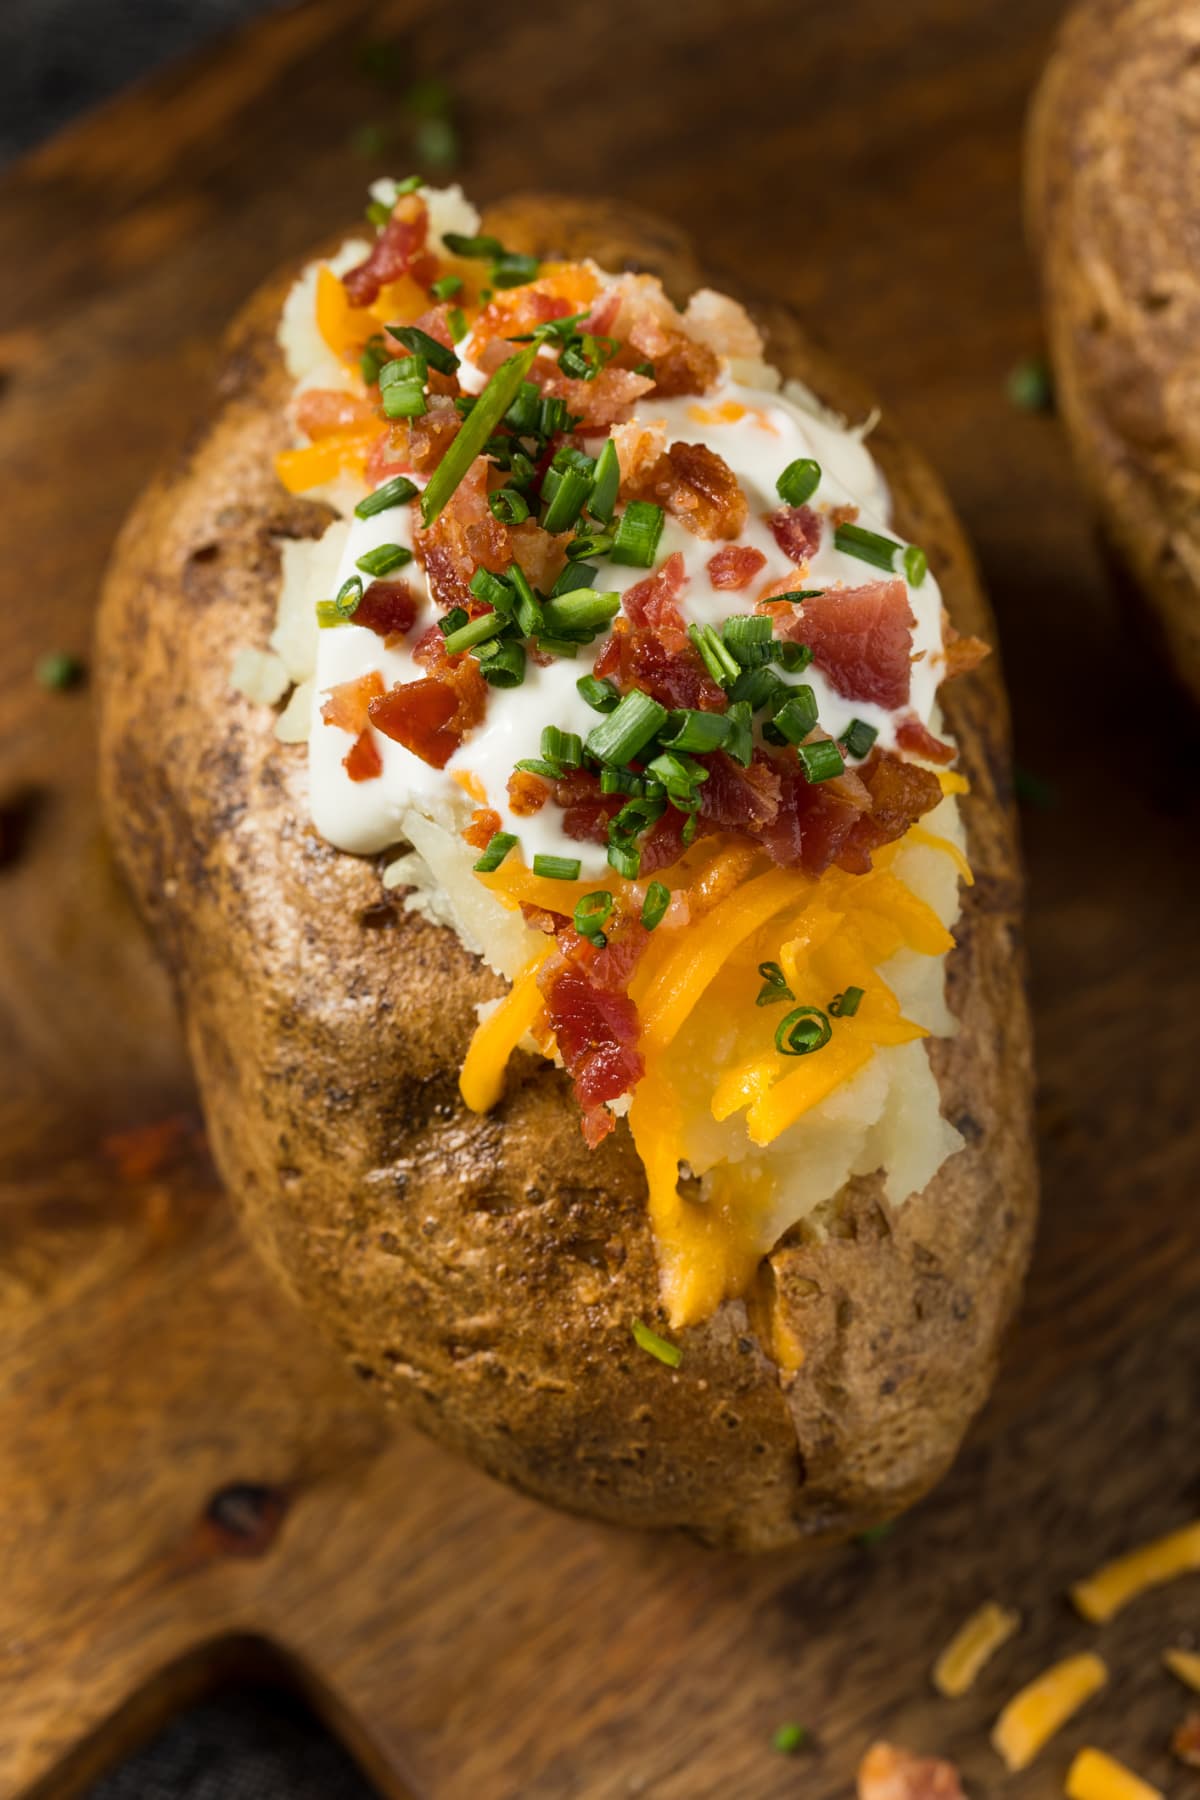 Baked potato with sour cream, cheese, bacon bits, and chives